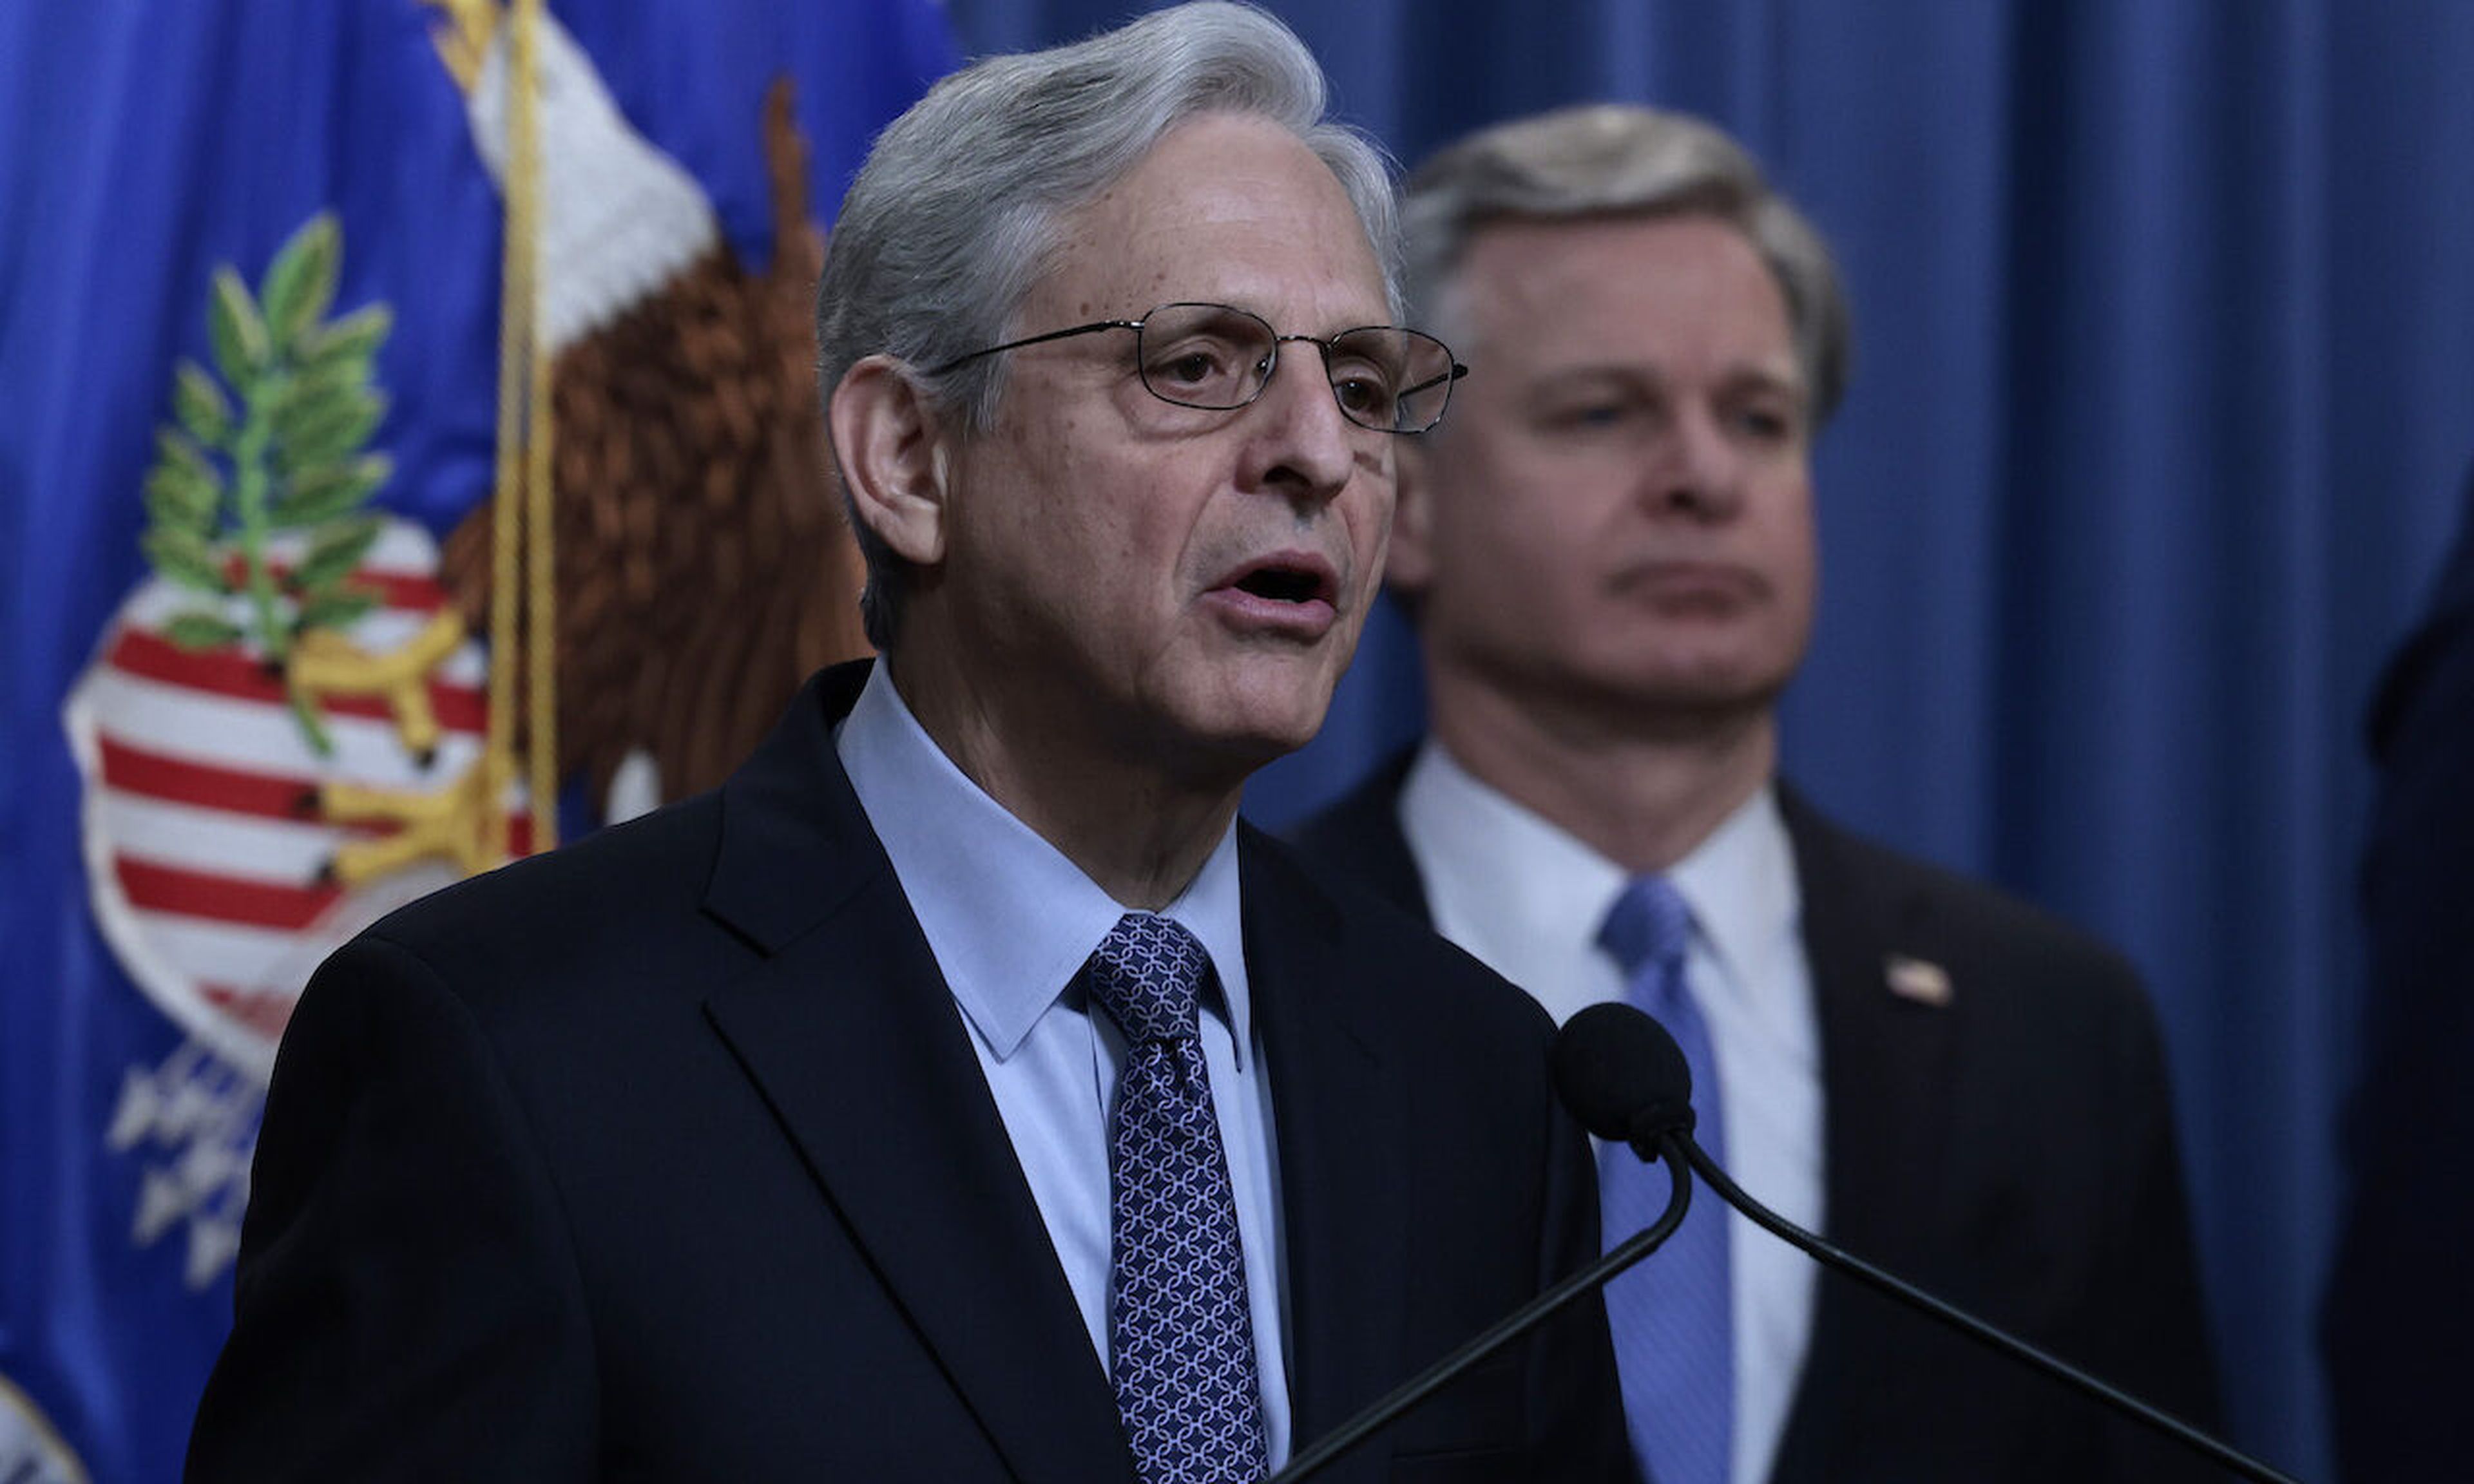 U.S. Attorney General Merrick Garland speaks during a press conference, alongside FBI Director Christopher Wray at the U.S. Justice Department on April 6, 2022, in Washington. (Photo by Anna Moneymaker/Getty Images)